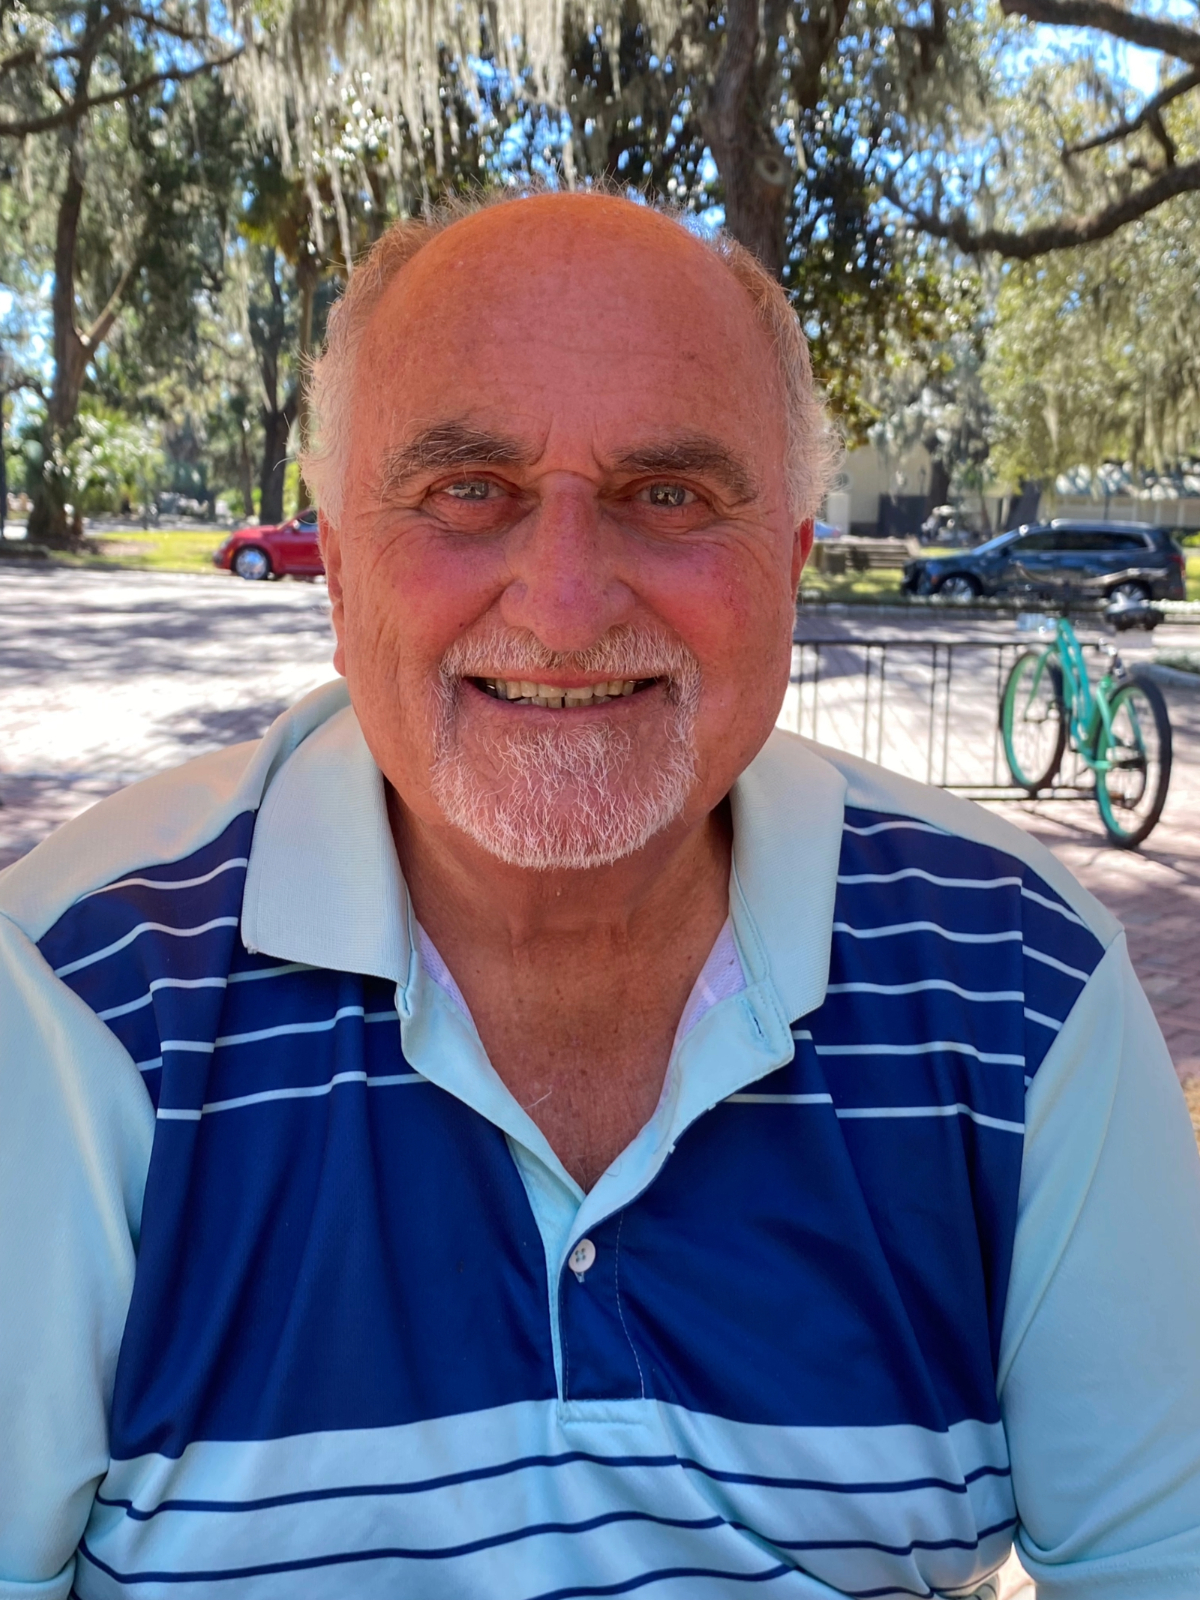 A man dressed casually smiles outdoors in fine weather with a tree-lined street and bicycle rack in the background.